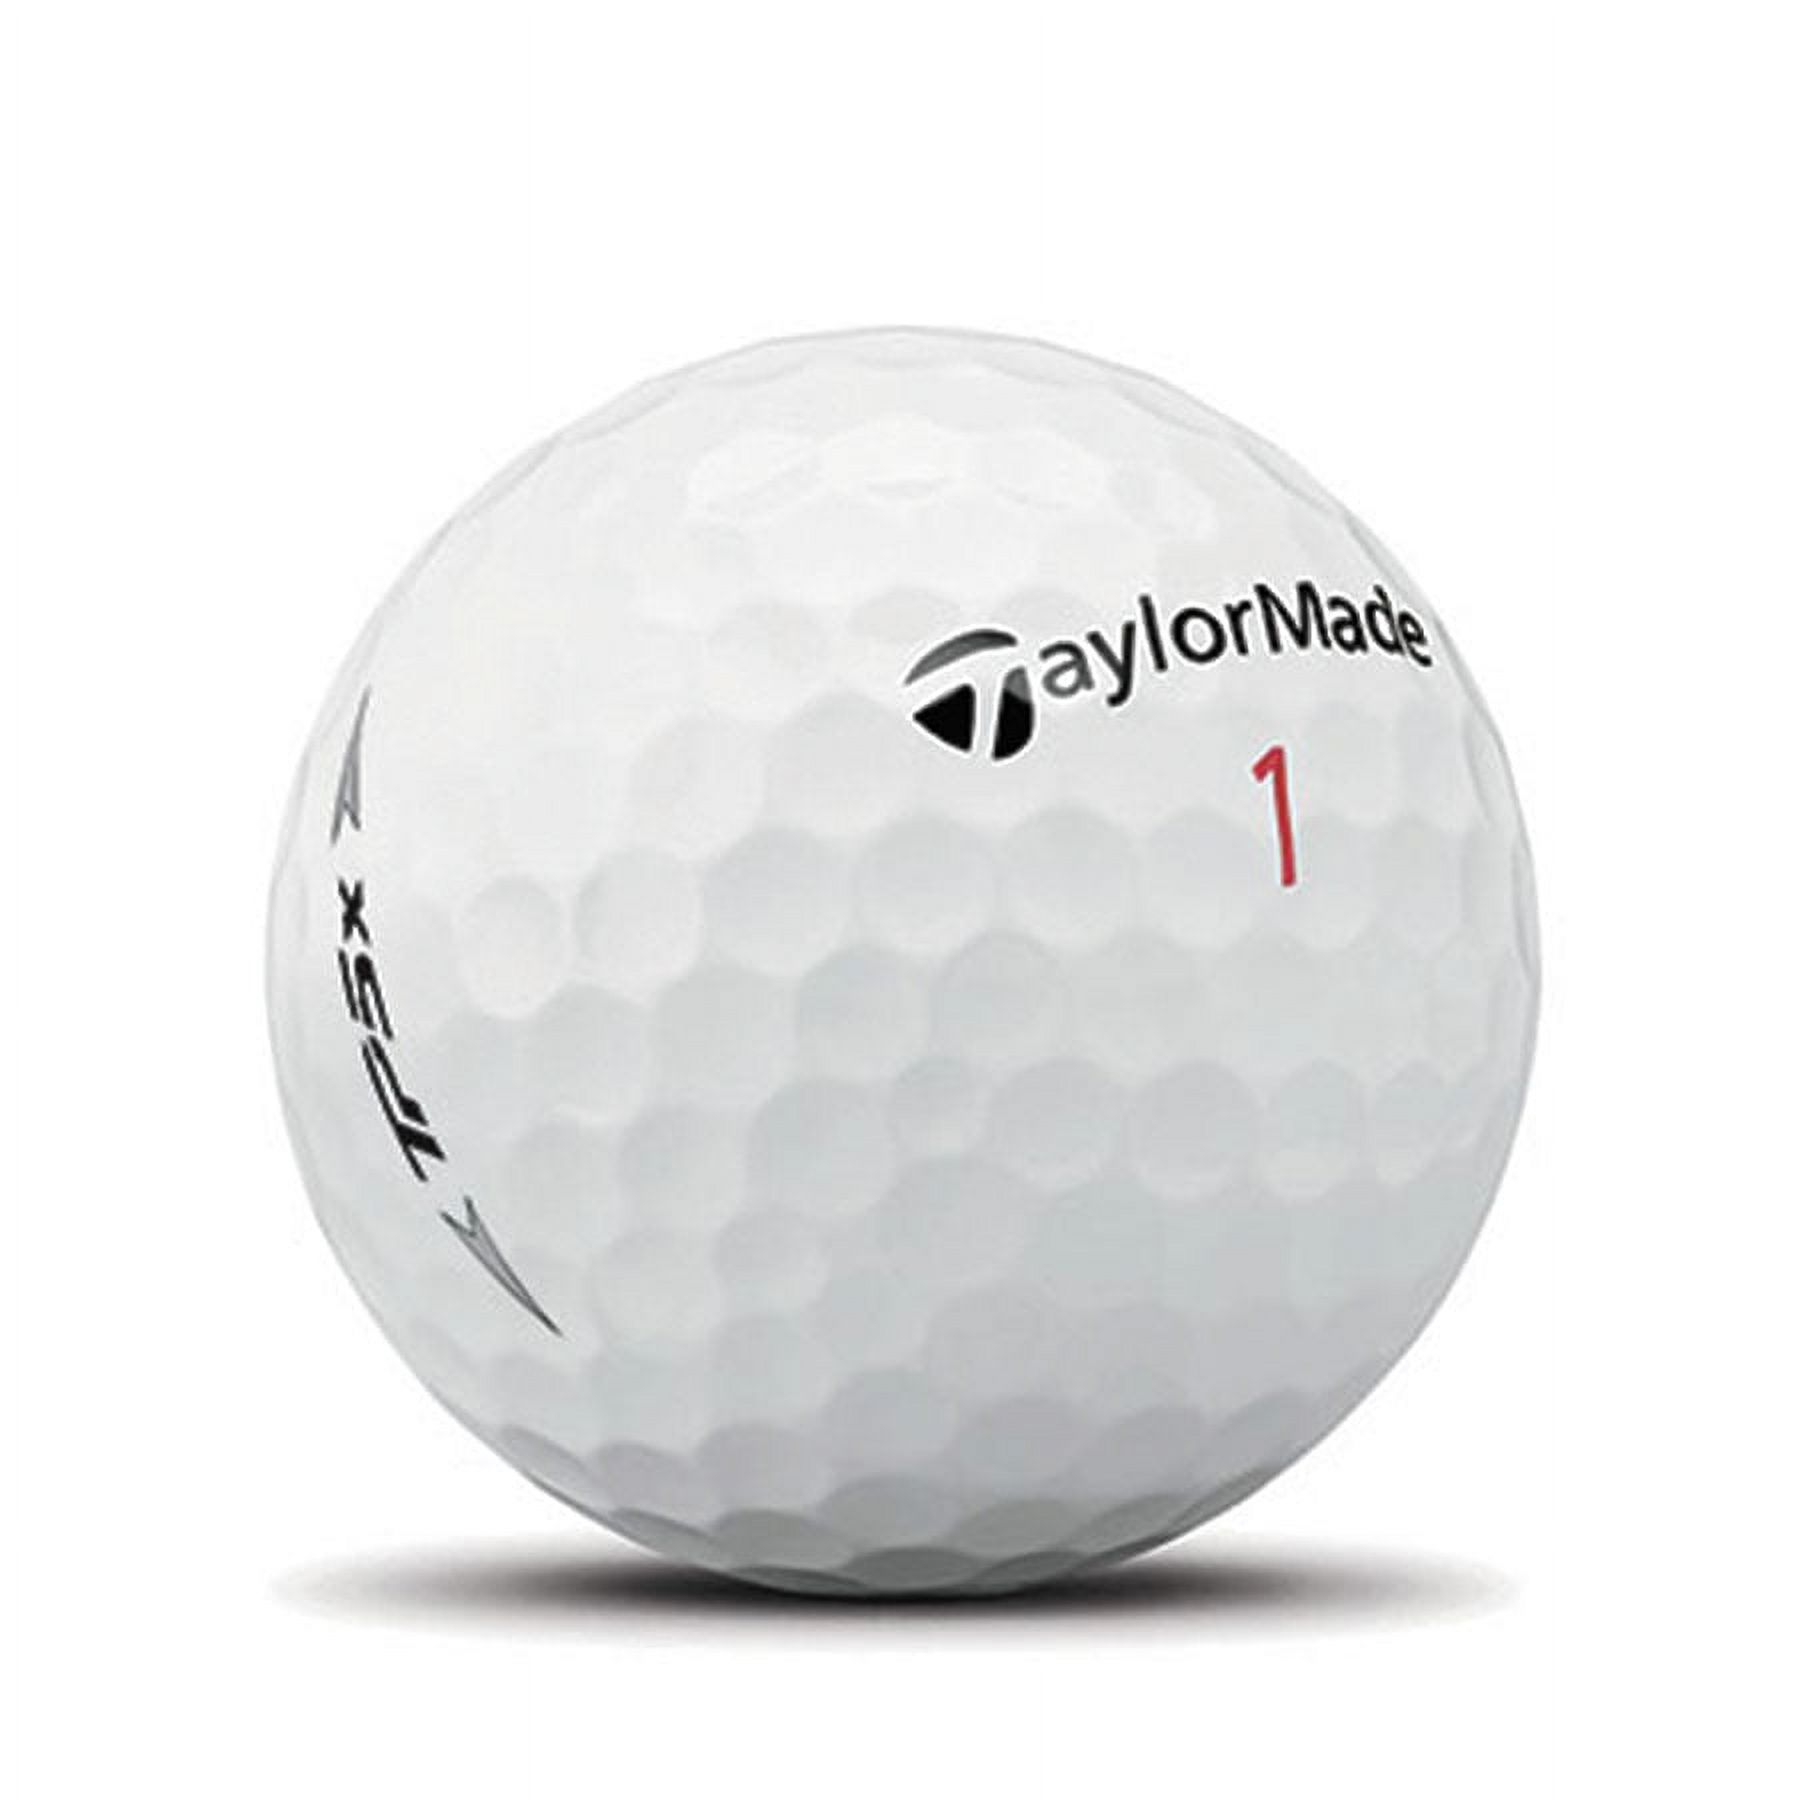 TaylorMade TP5x Golf Balls, 12 Pack - image 2 of 7